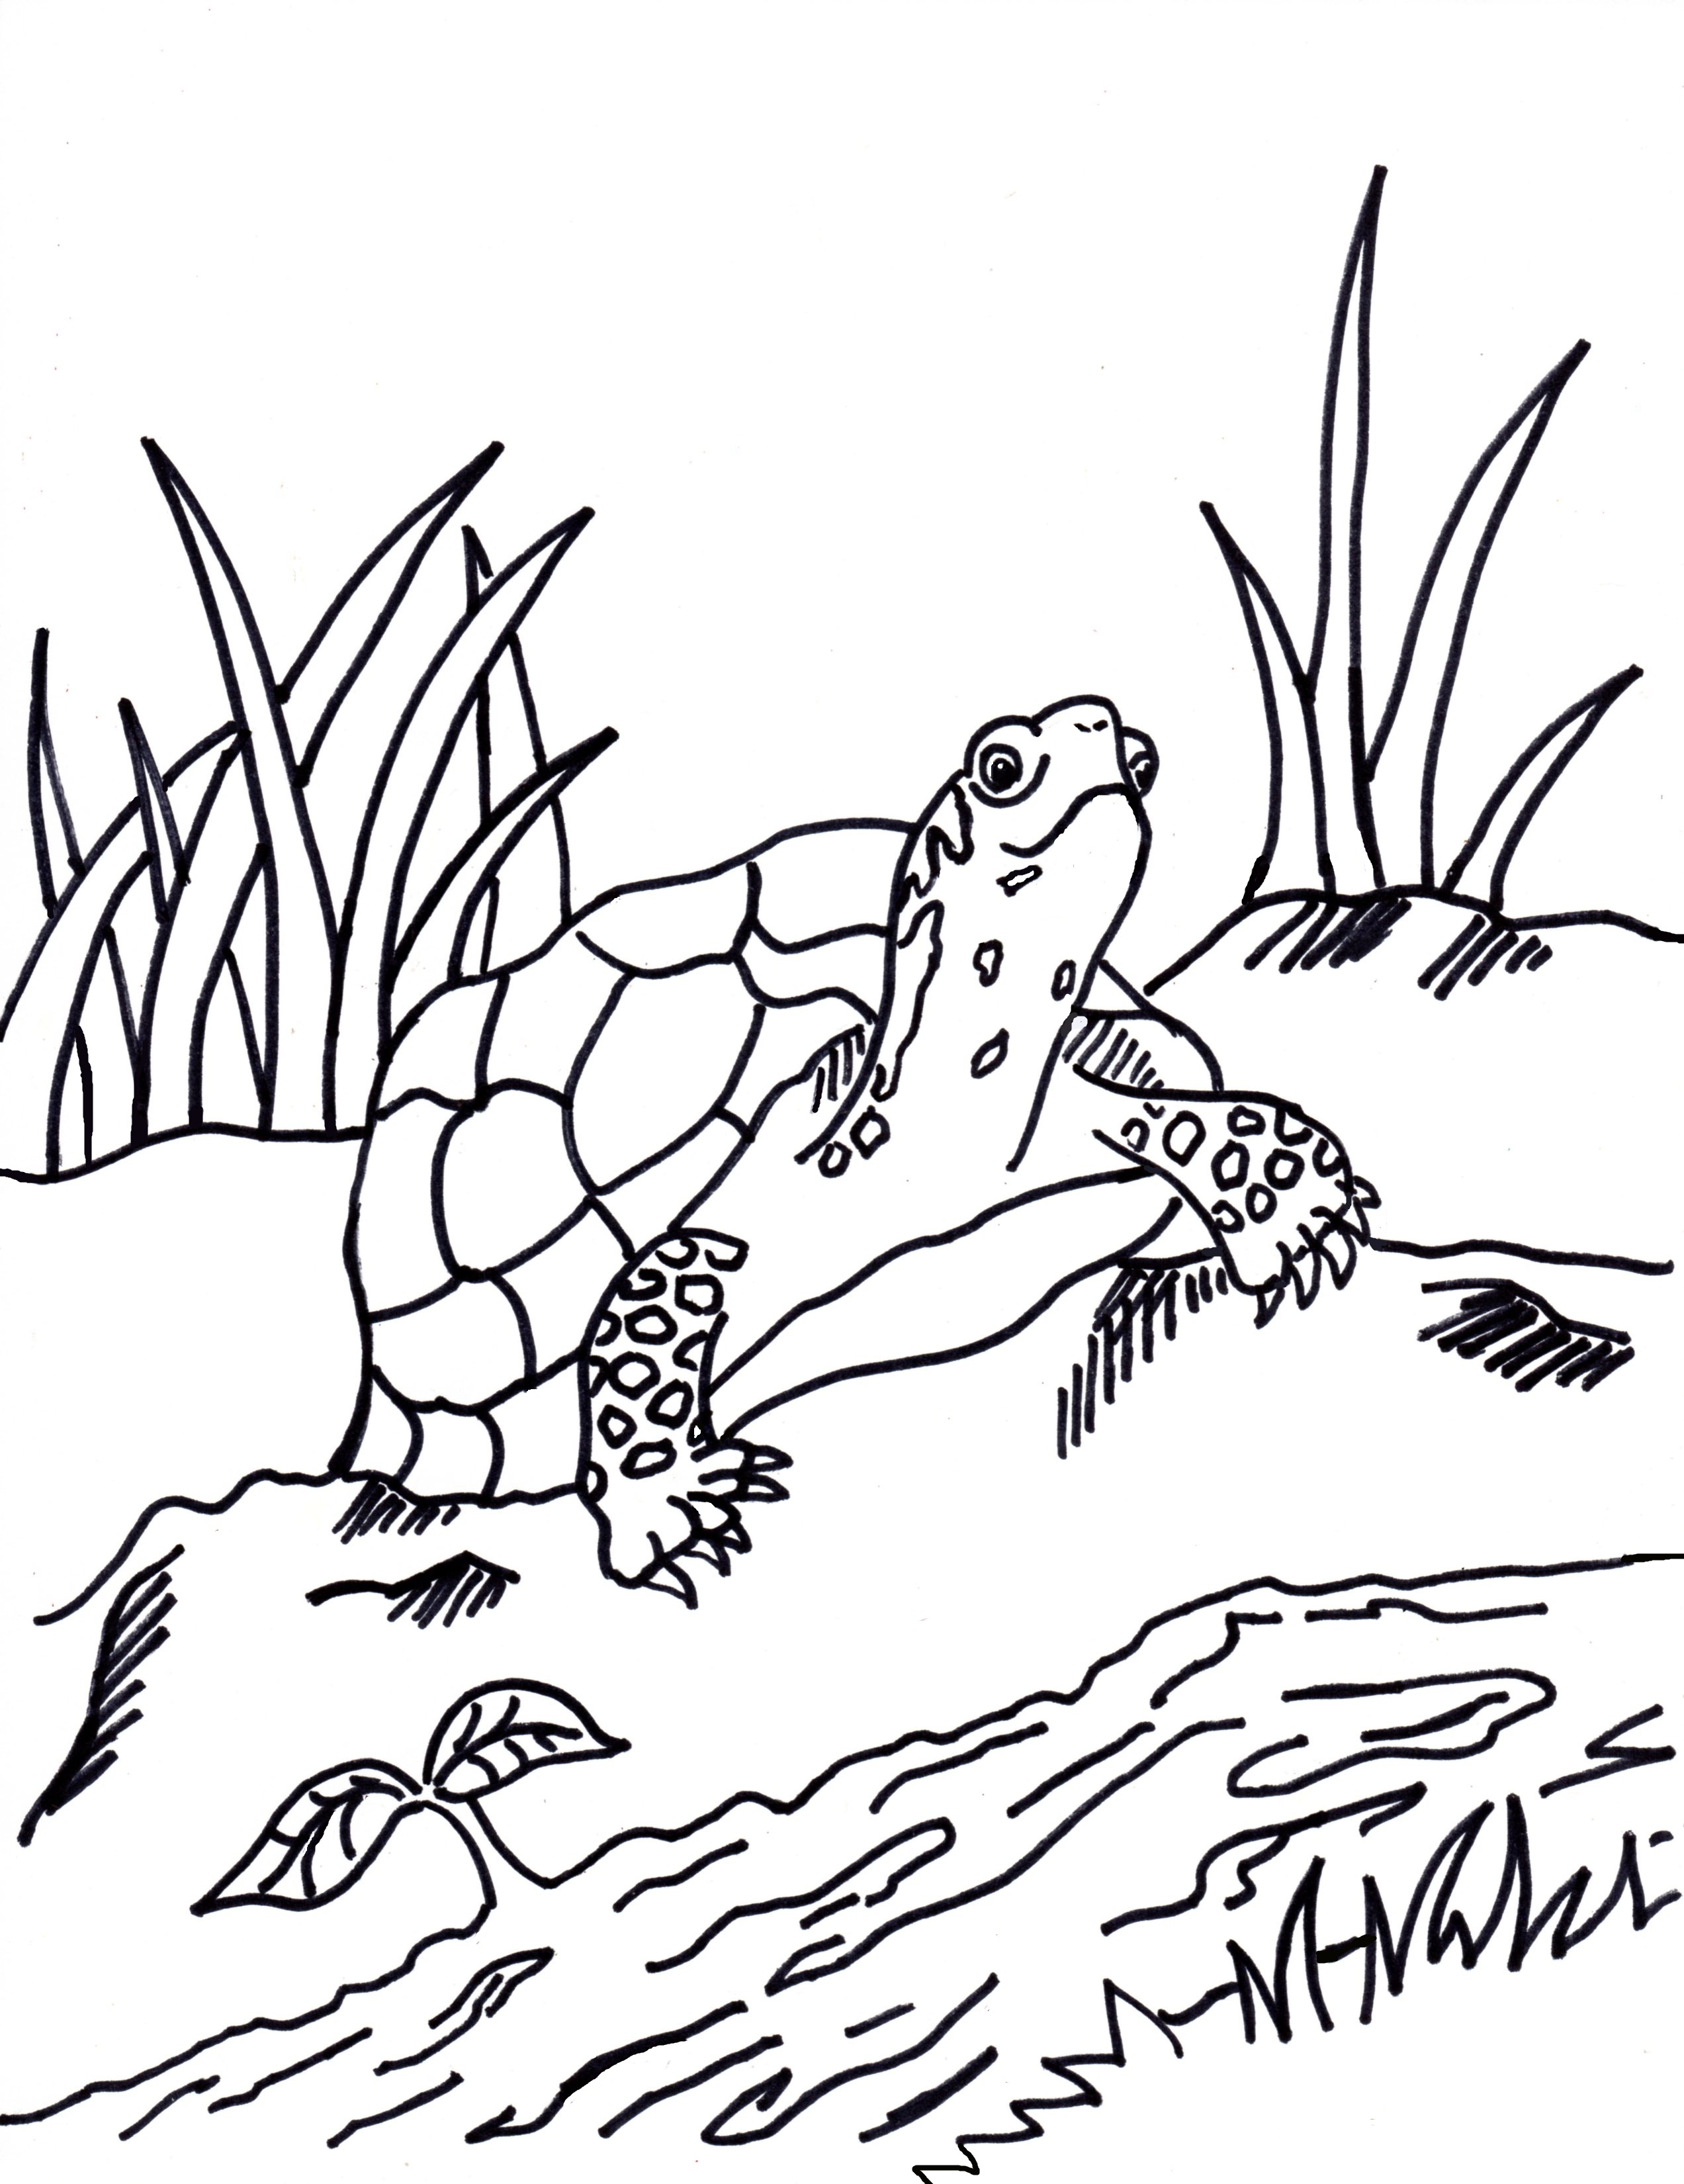 Box Turtle Coloring Page   Samantha Bell